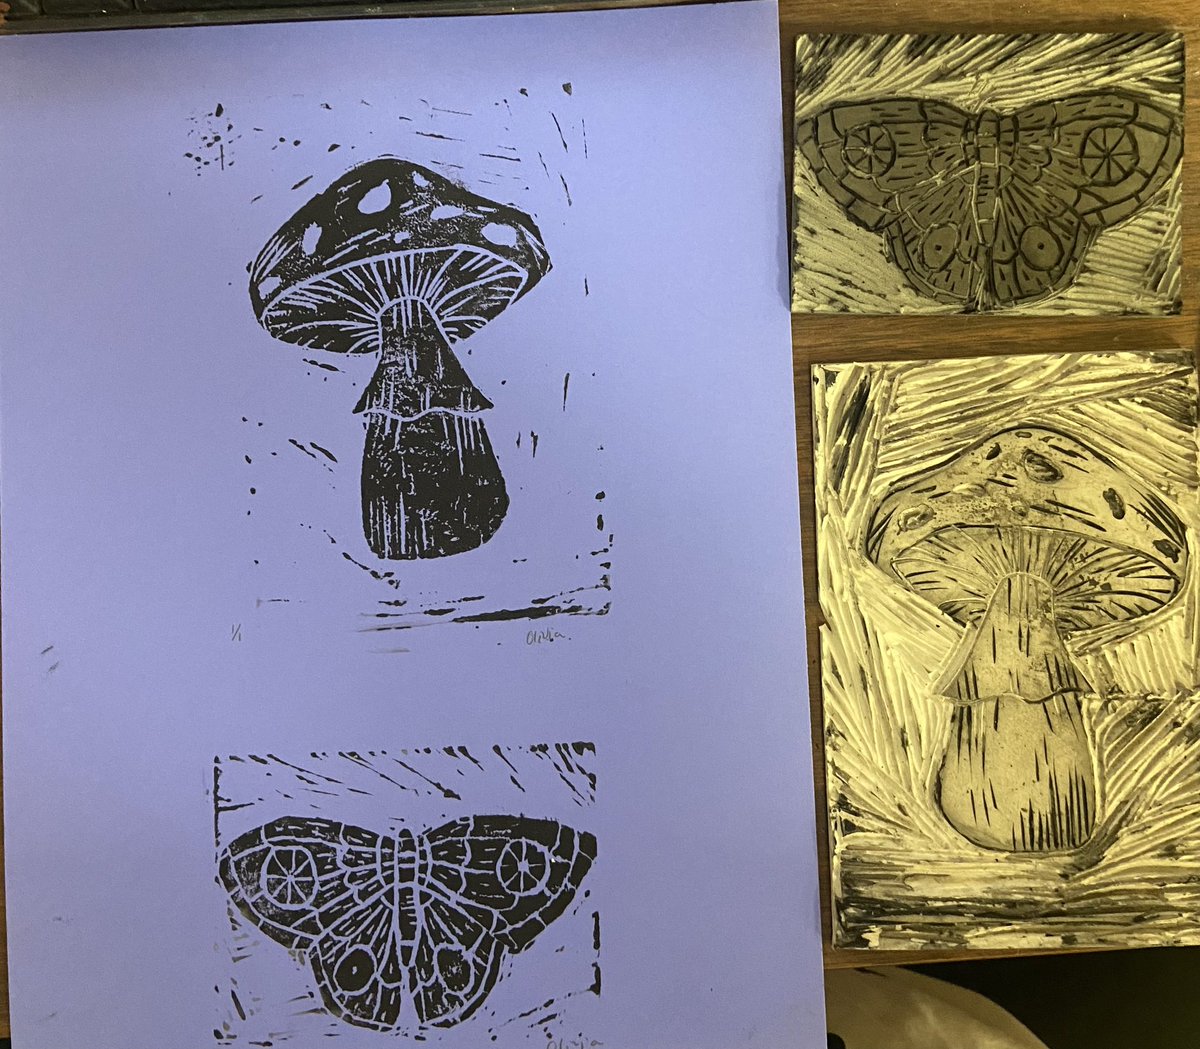 My students are making stamps using linocutting materials and printing ink. Such a fun June project! 
#ArtStudents #Stamps #Teaching